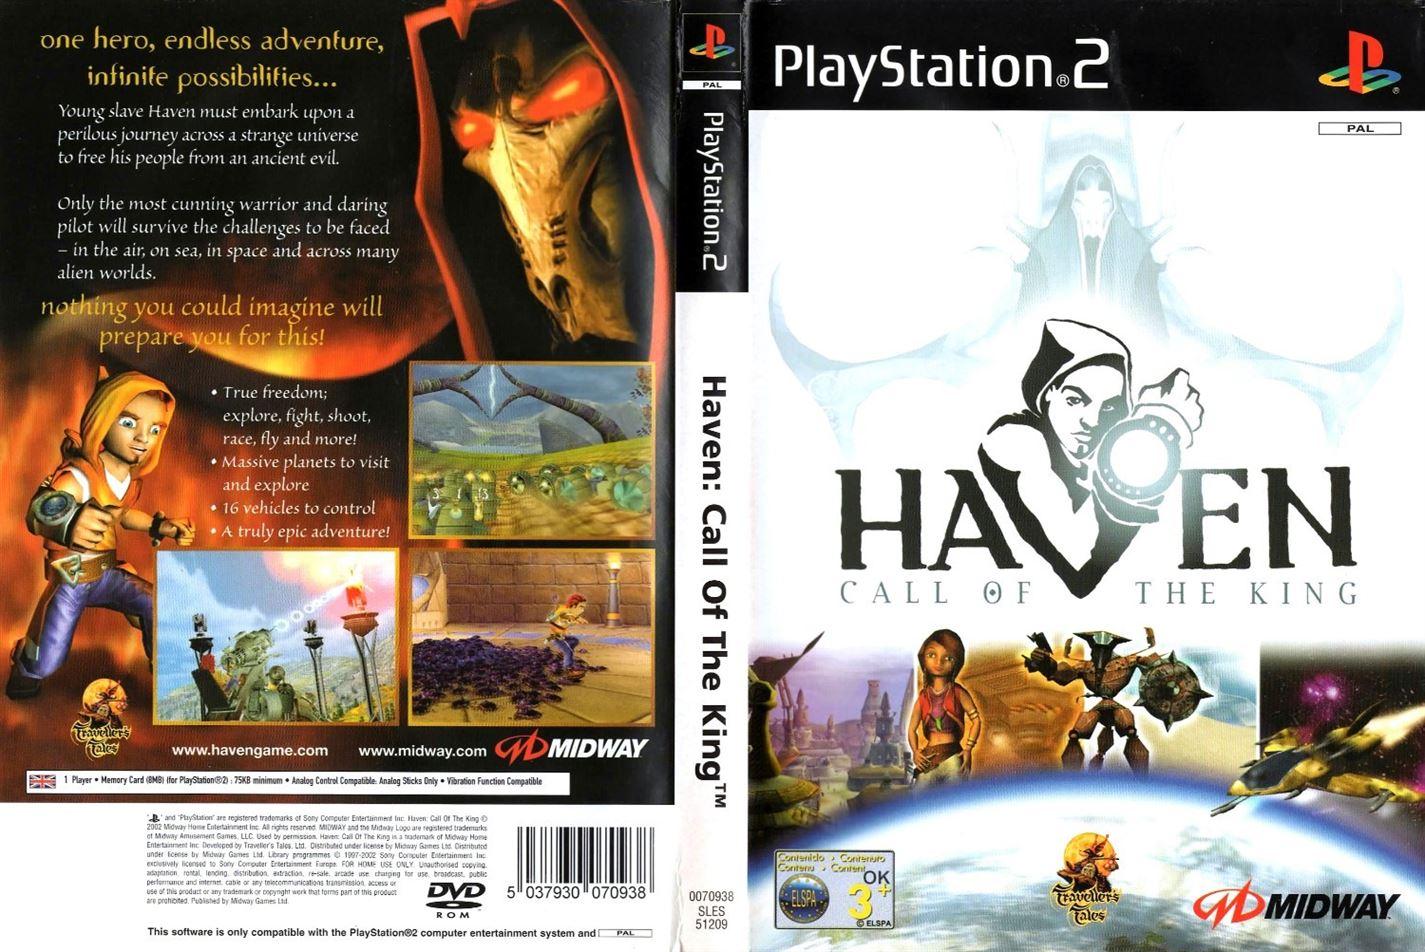 Haven: Call Of The King PS2 (Playstation 2) - UK Seller